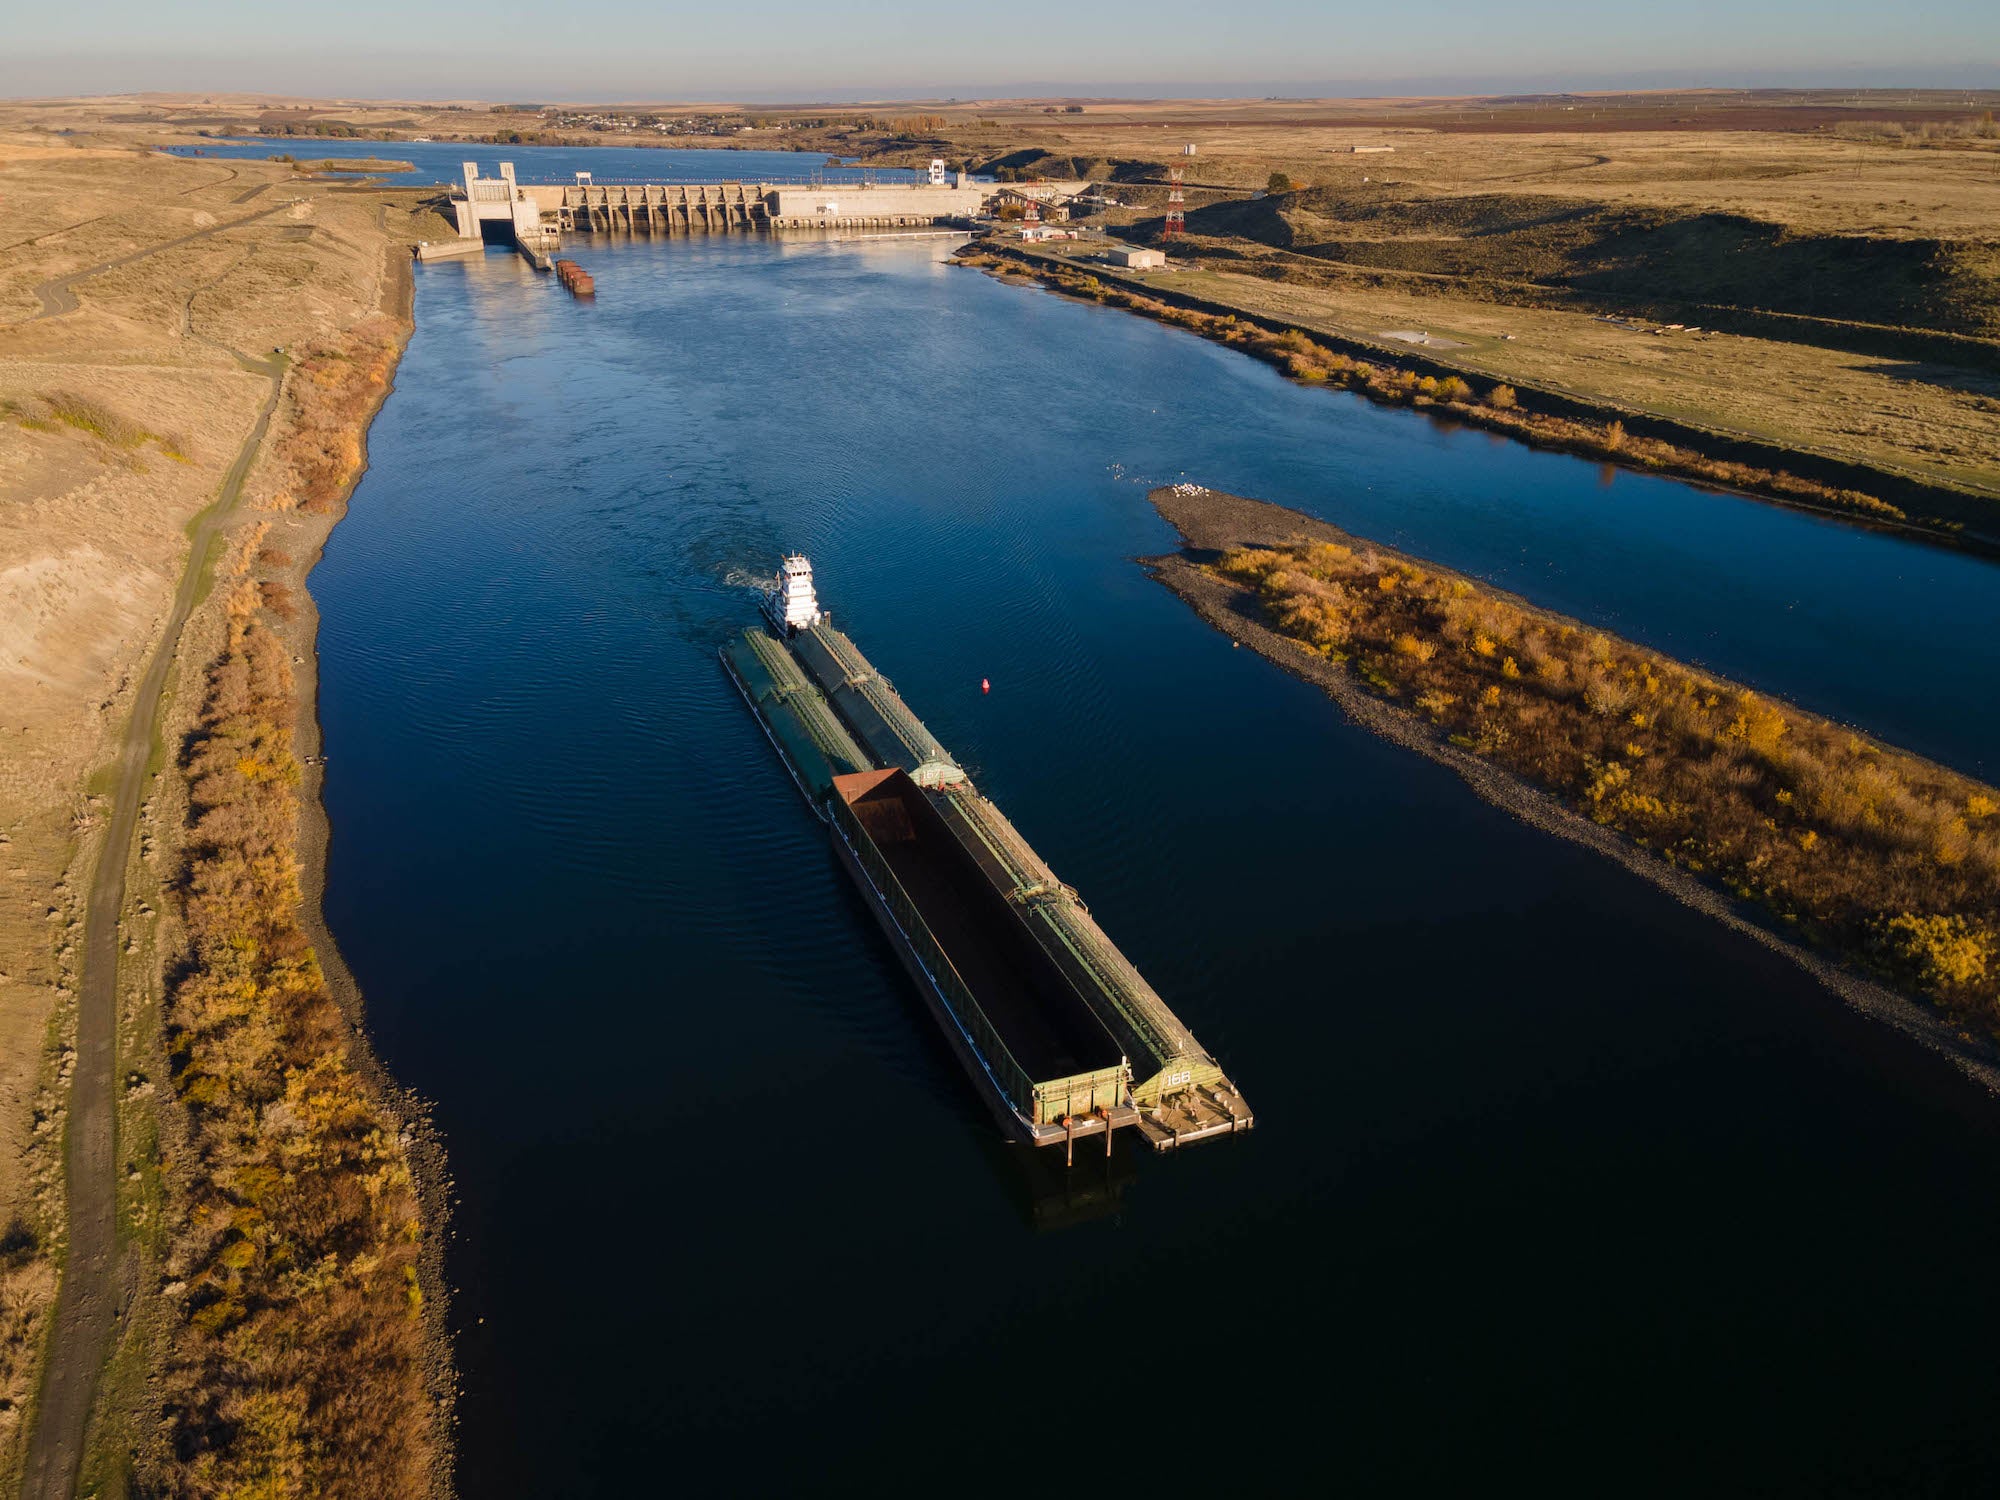 The construction of the Lower Four Snake River Dams made Lewiston, Idaho the furthest inland port in the United States. The lower river is now used by barges, which carry everything from winter wheat to baby steelhead.